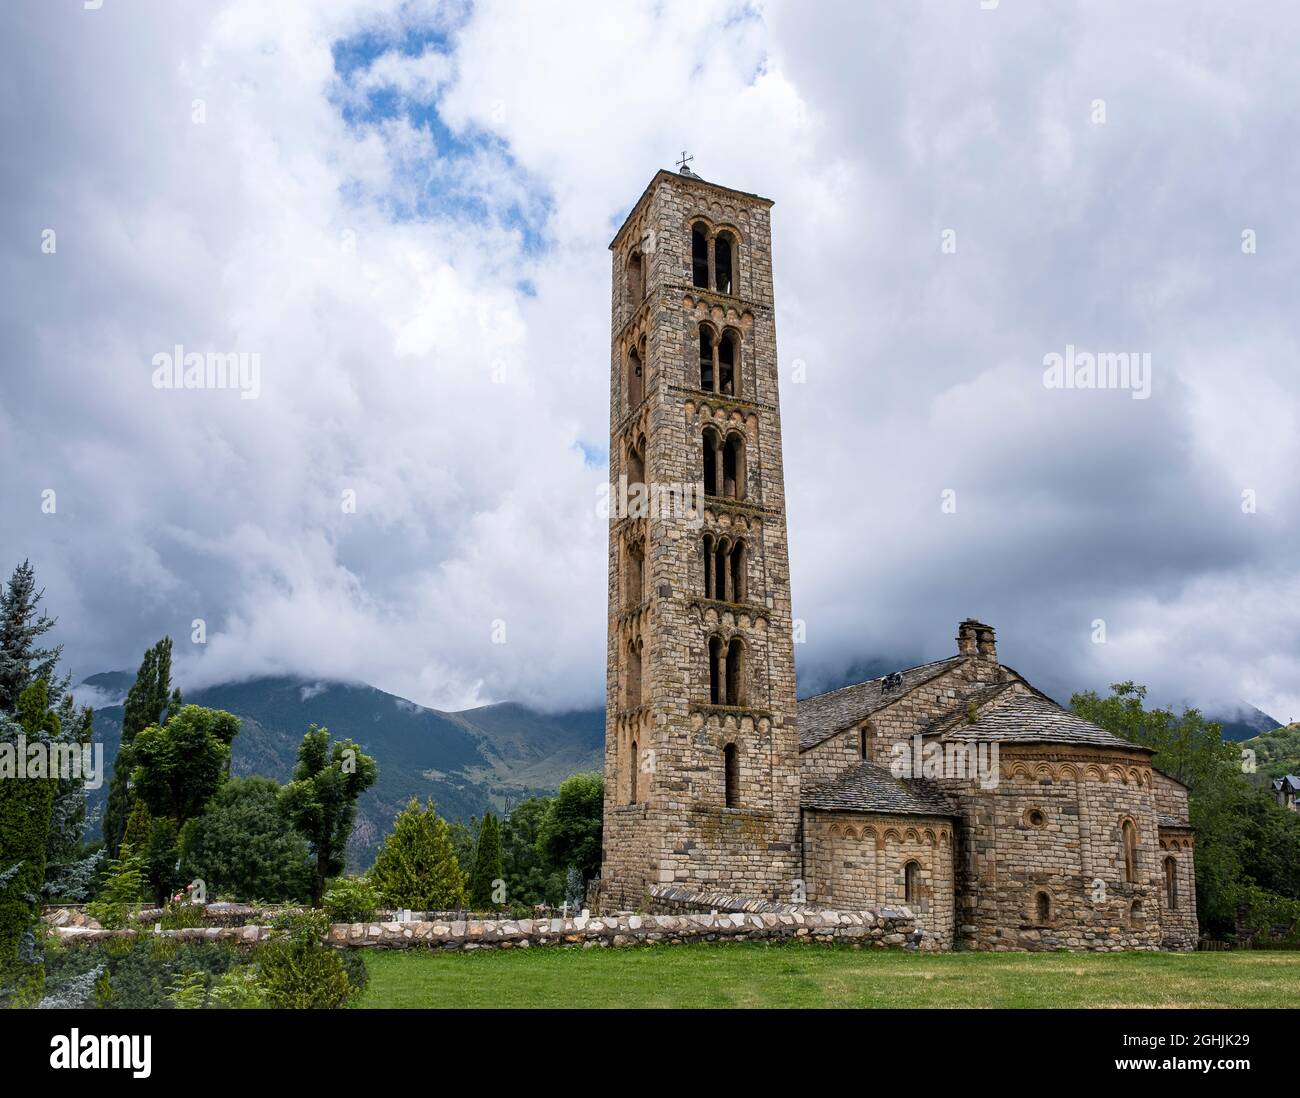 Romanesque church of San Clemente of Tahull, with its high bell tower and the mountains of the Lleida Pyrenees in the background on a cloudy day, hori Stock Photo